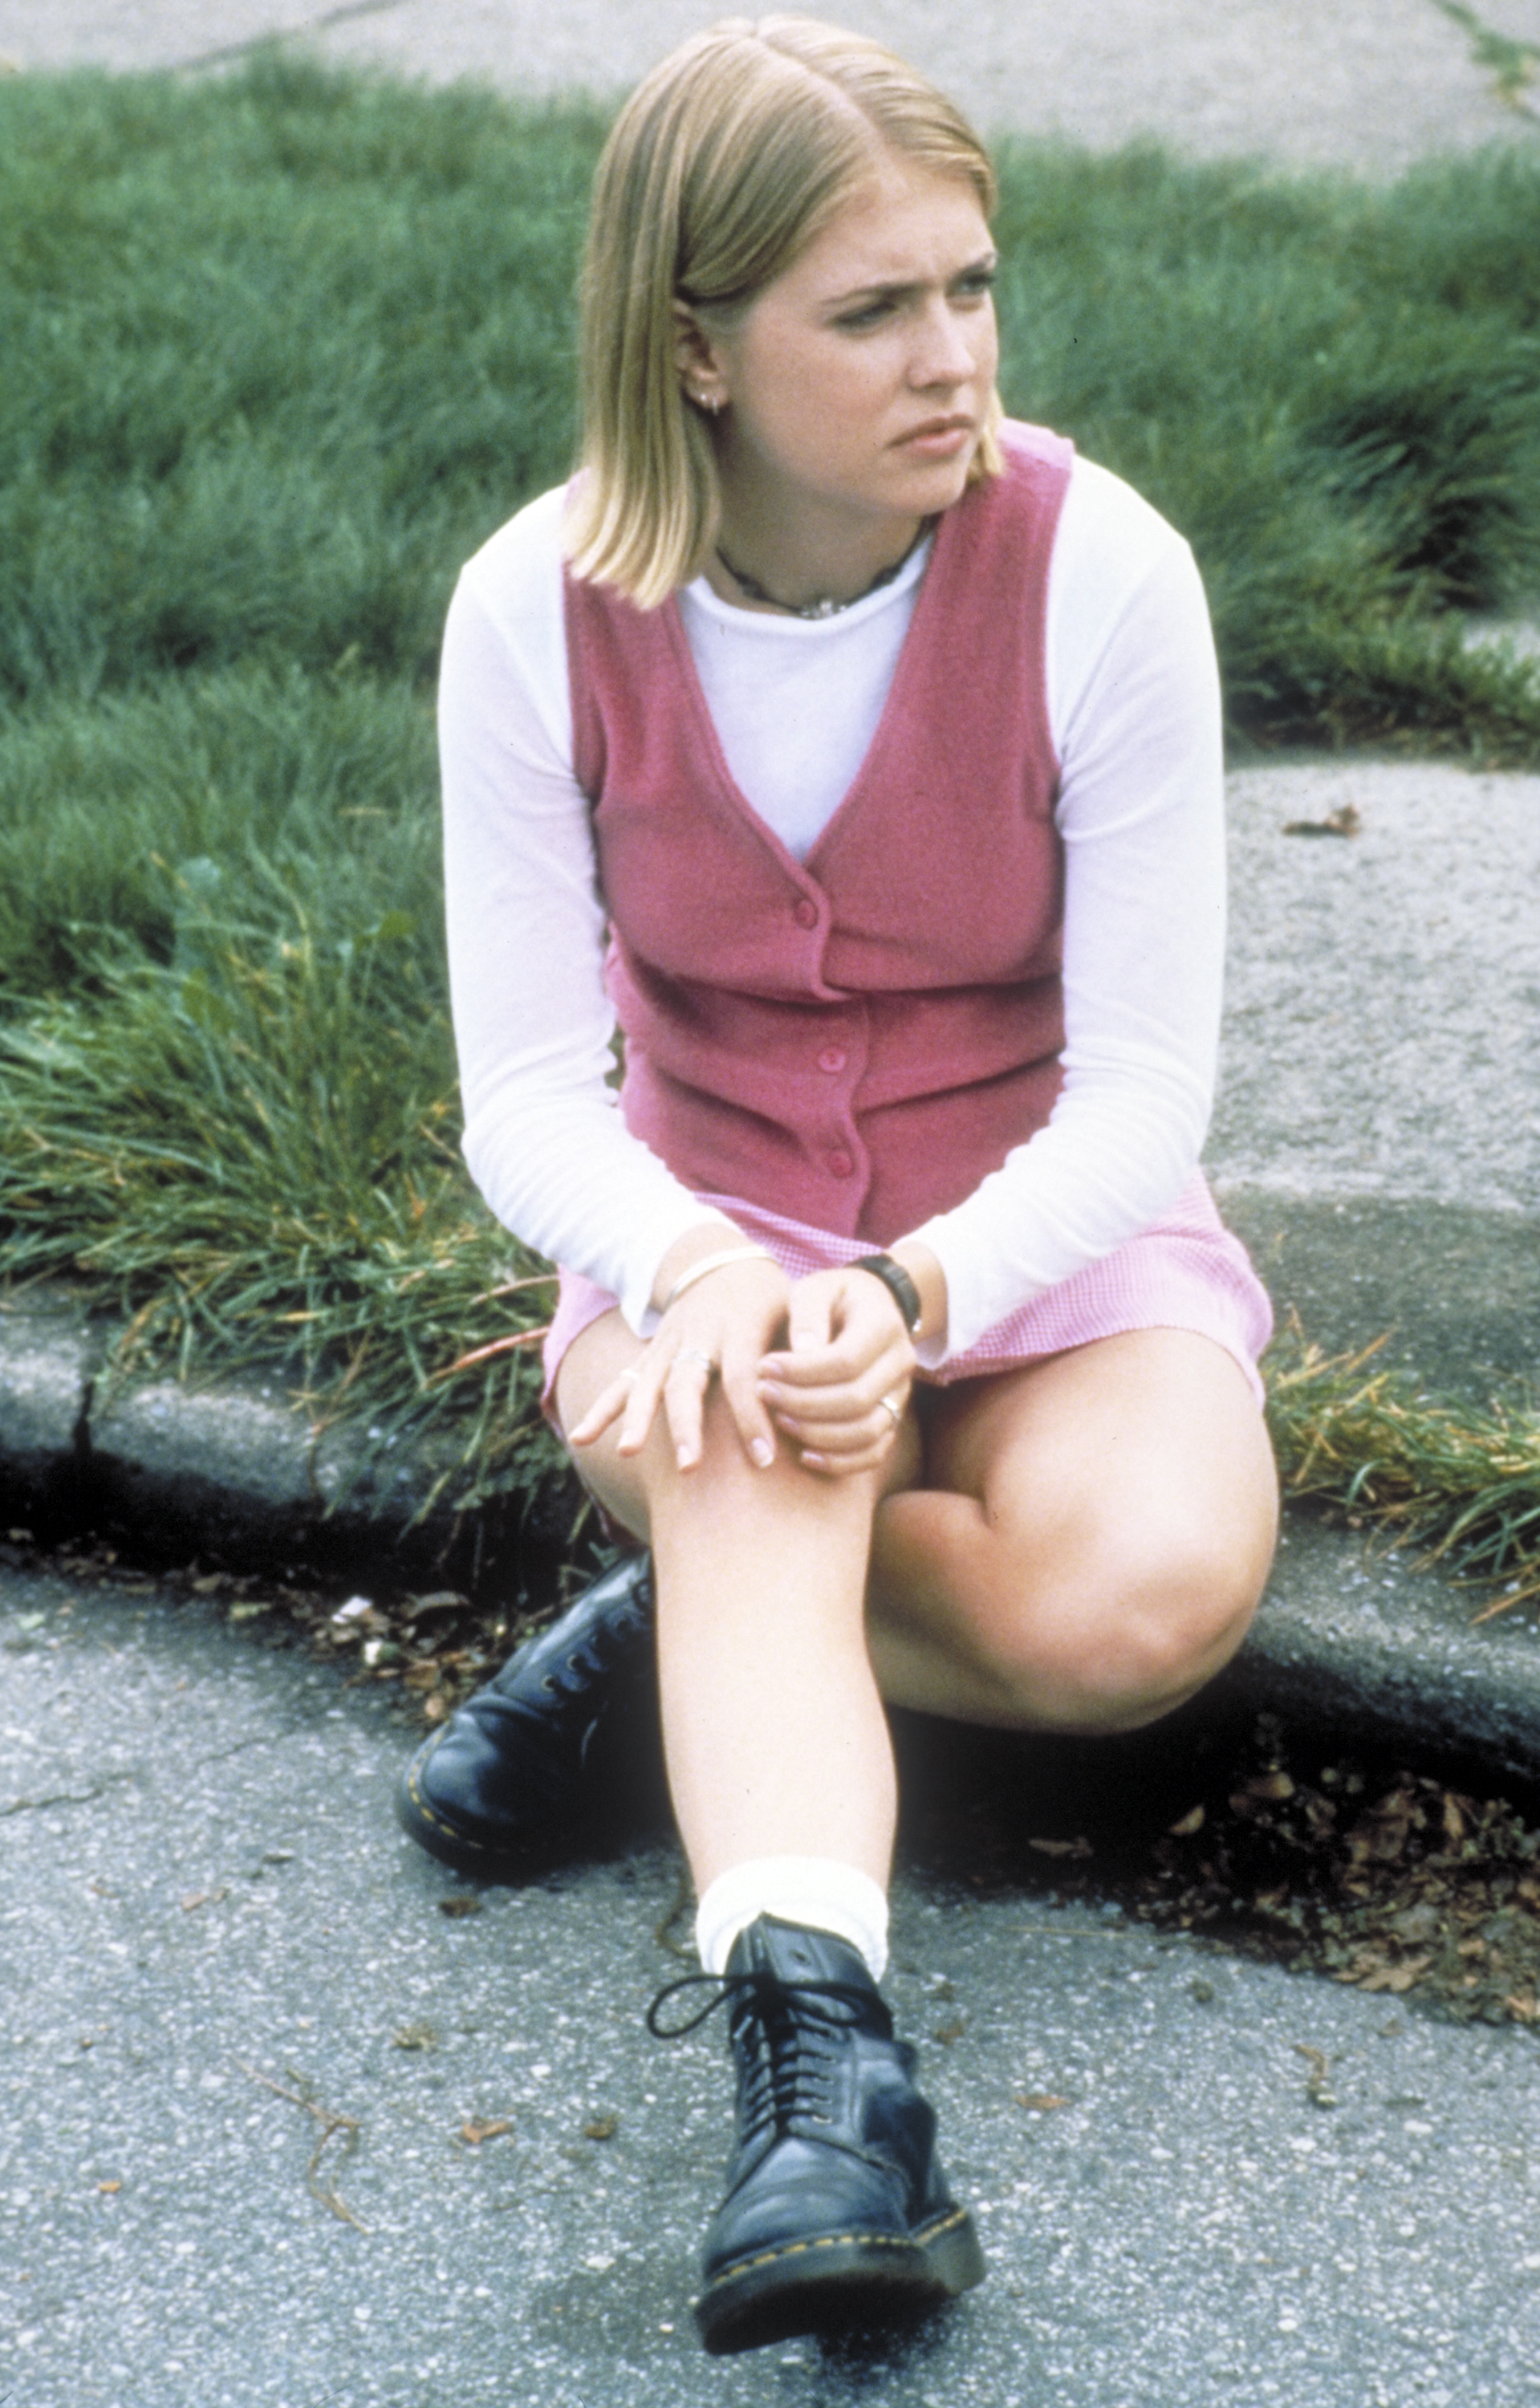 The child star as Sabrina, a nice, adolescent witch in "Sabrina the Teenage Witch," on April 7, 1996. | Source: Getty Images